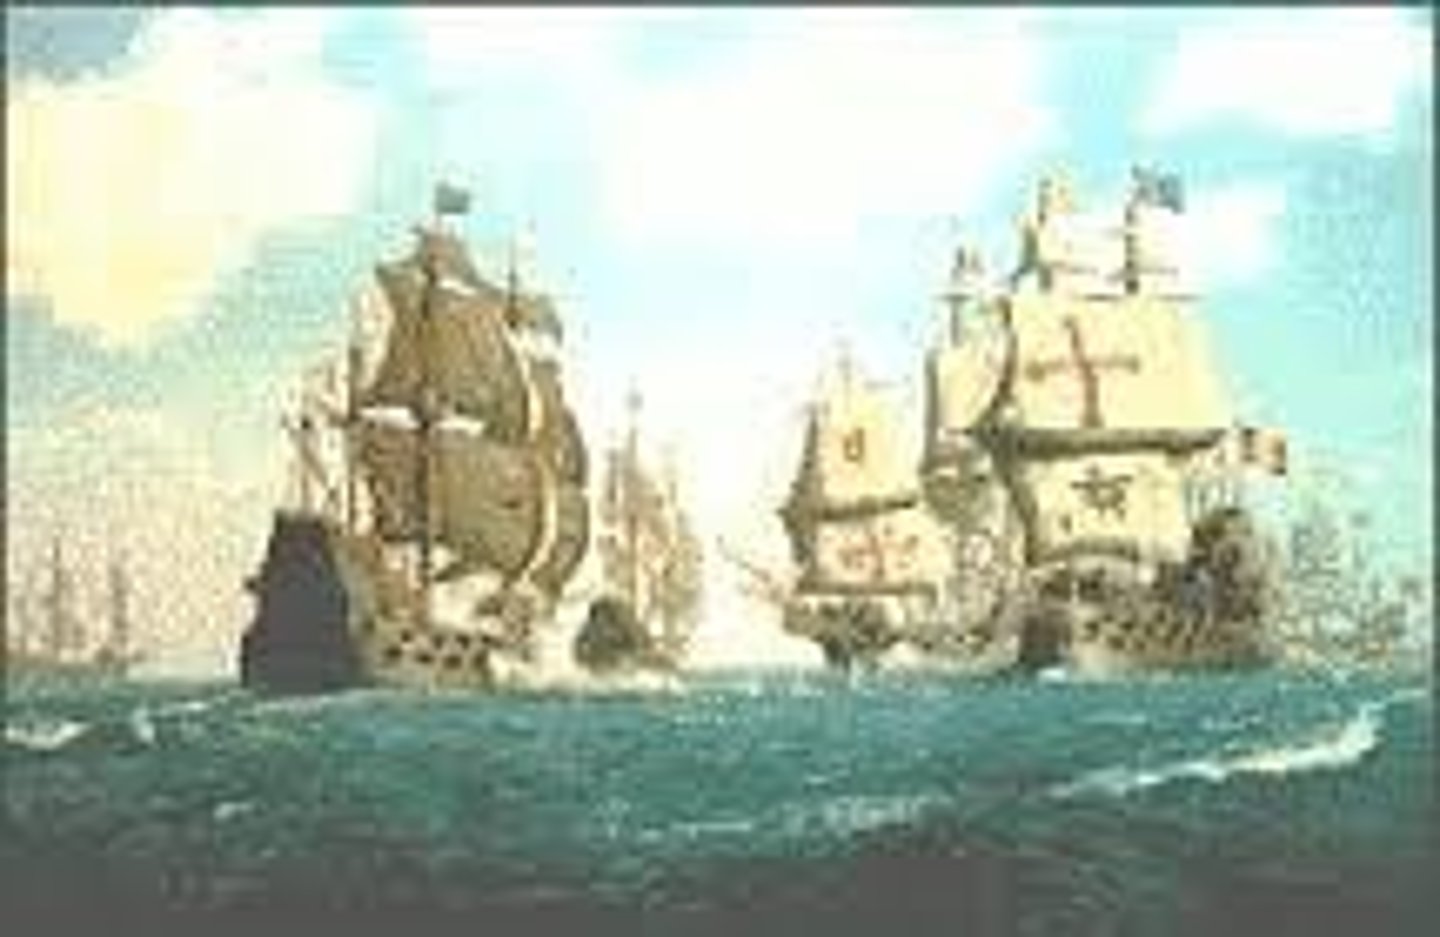 <p>Spain's powerful navy that helped them monopolize the New World until their defeat in 1588.. Defeated due to smaller, faster English ships and stormy seas that took out many of the Spanish ships.</p>